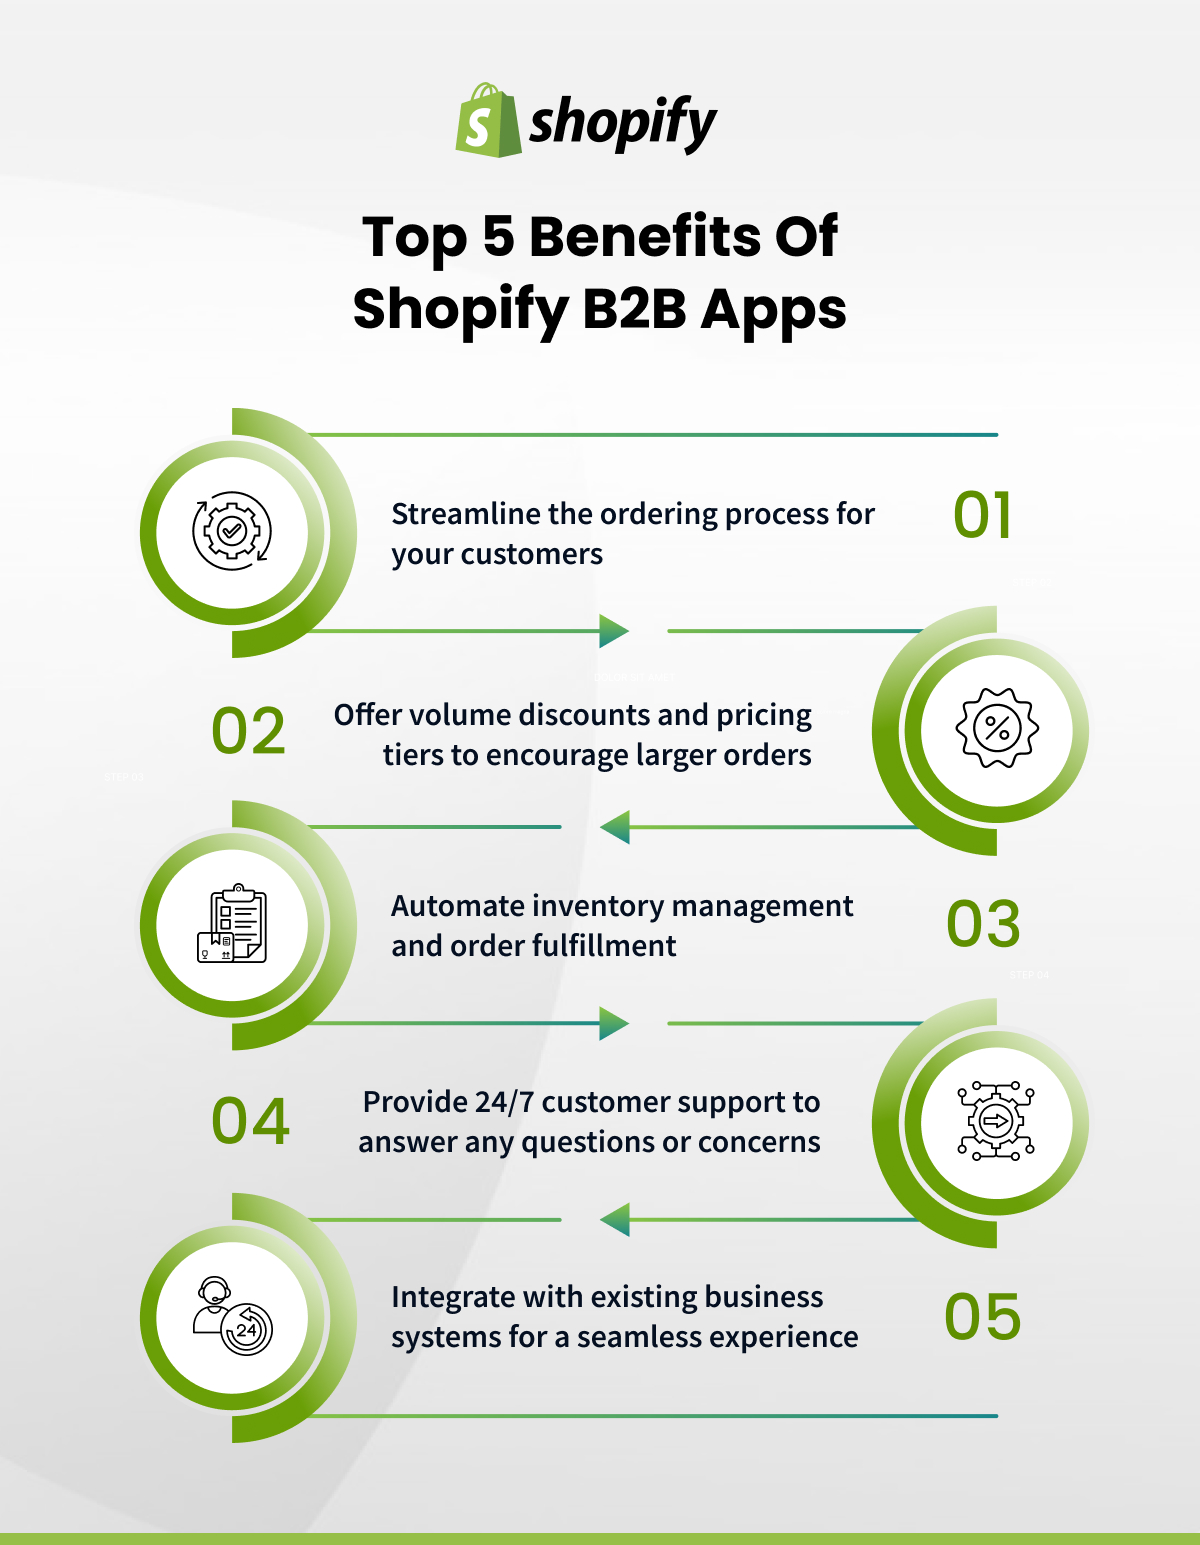 Top 5 Benefits of Shopify B2B Apps